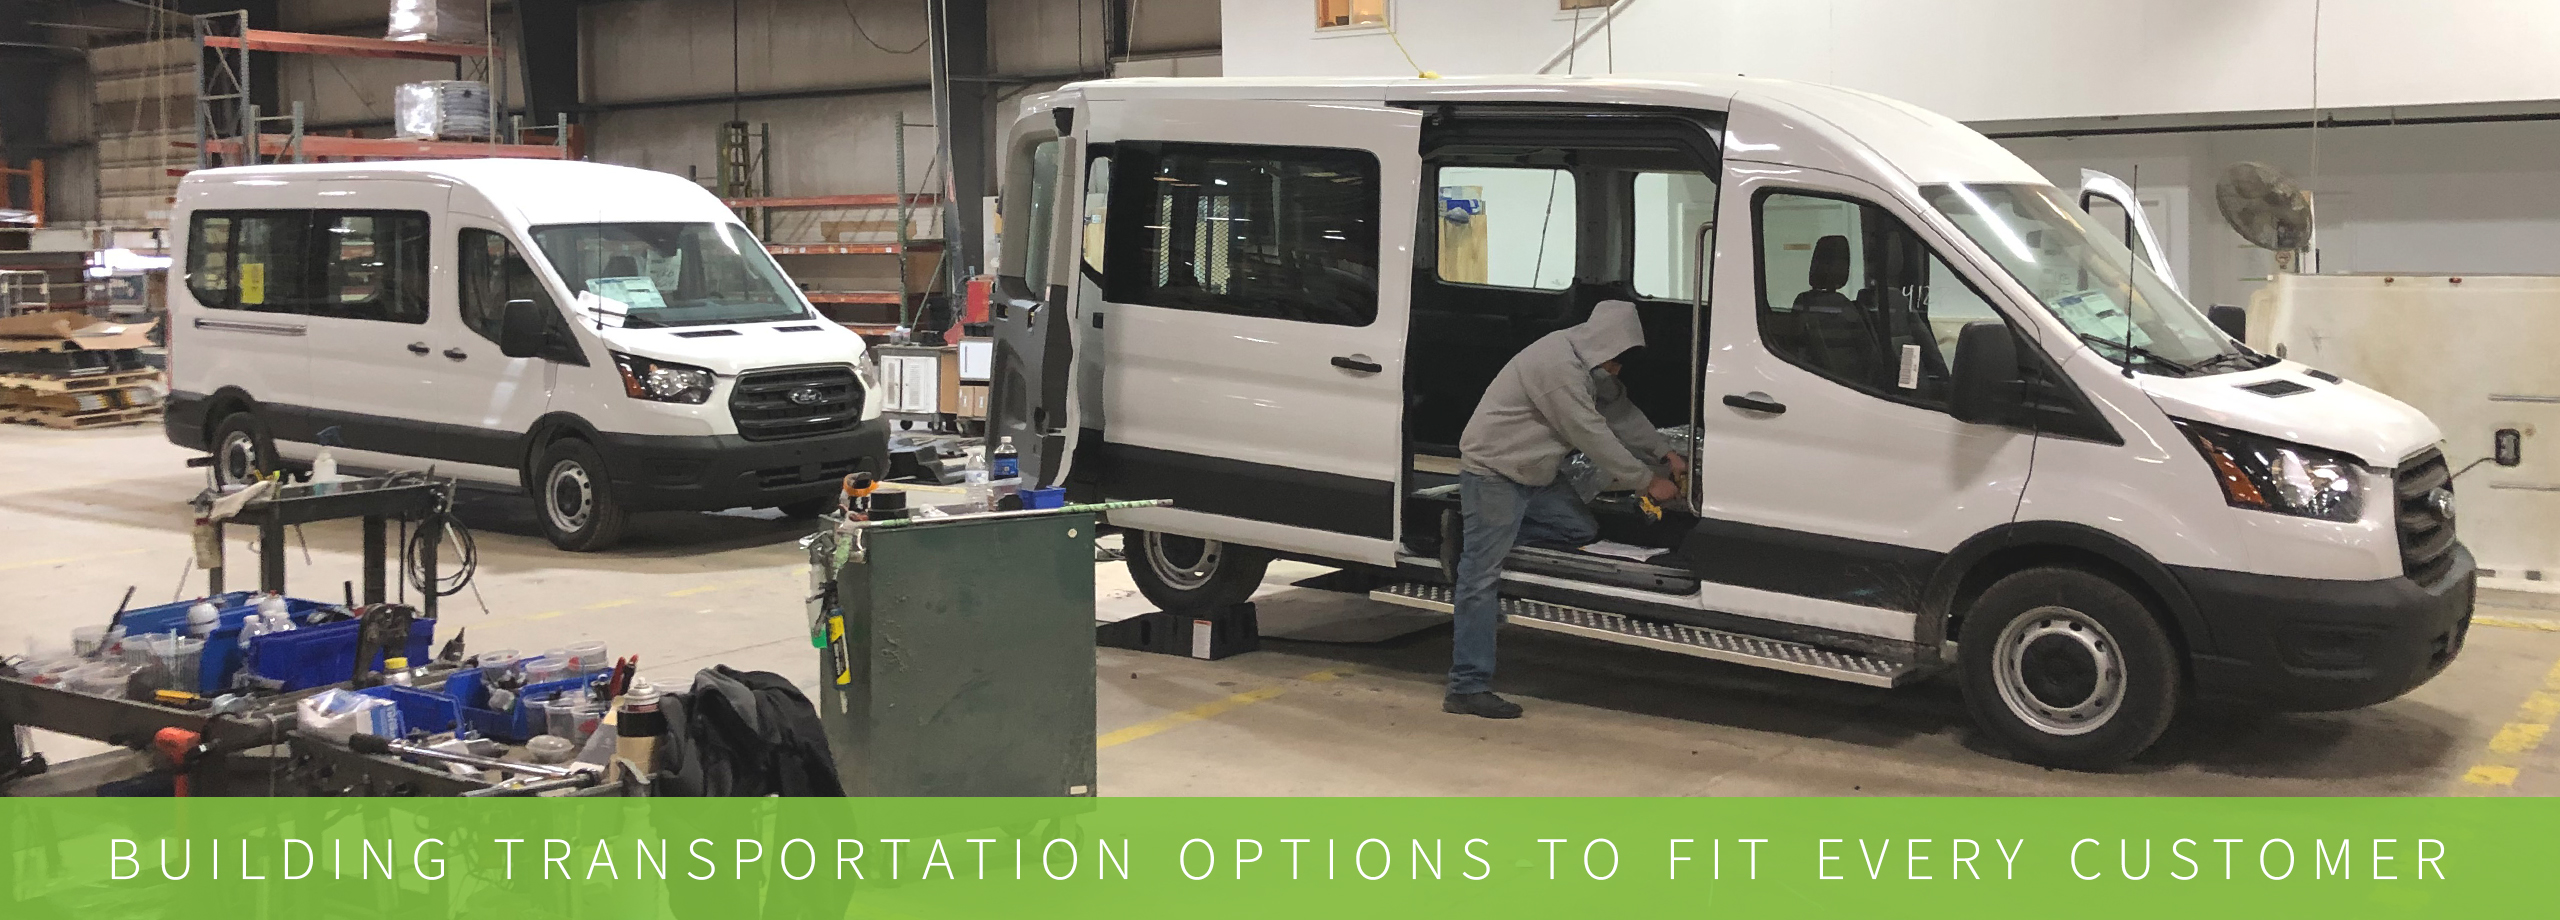 Building Transportation options to fet every customer